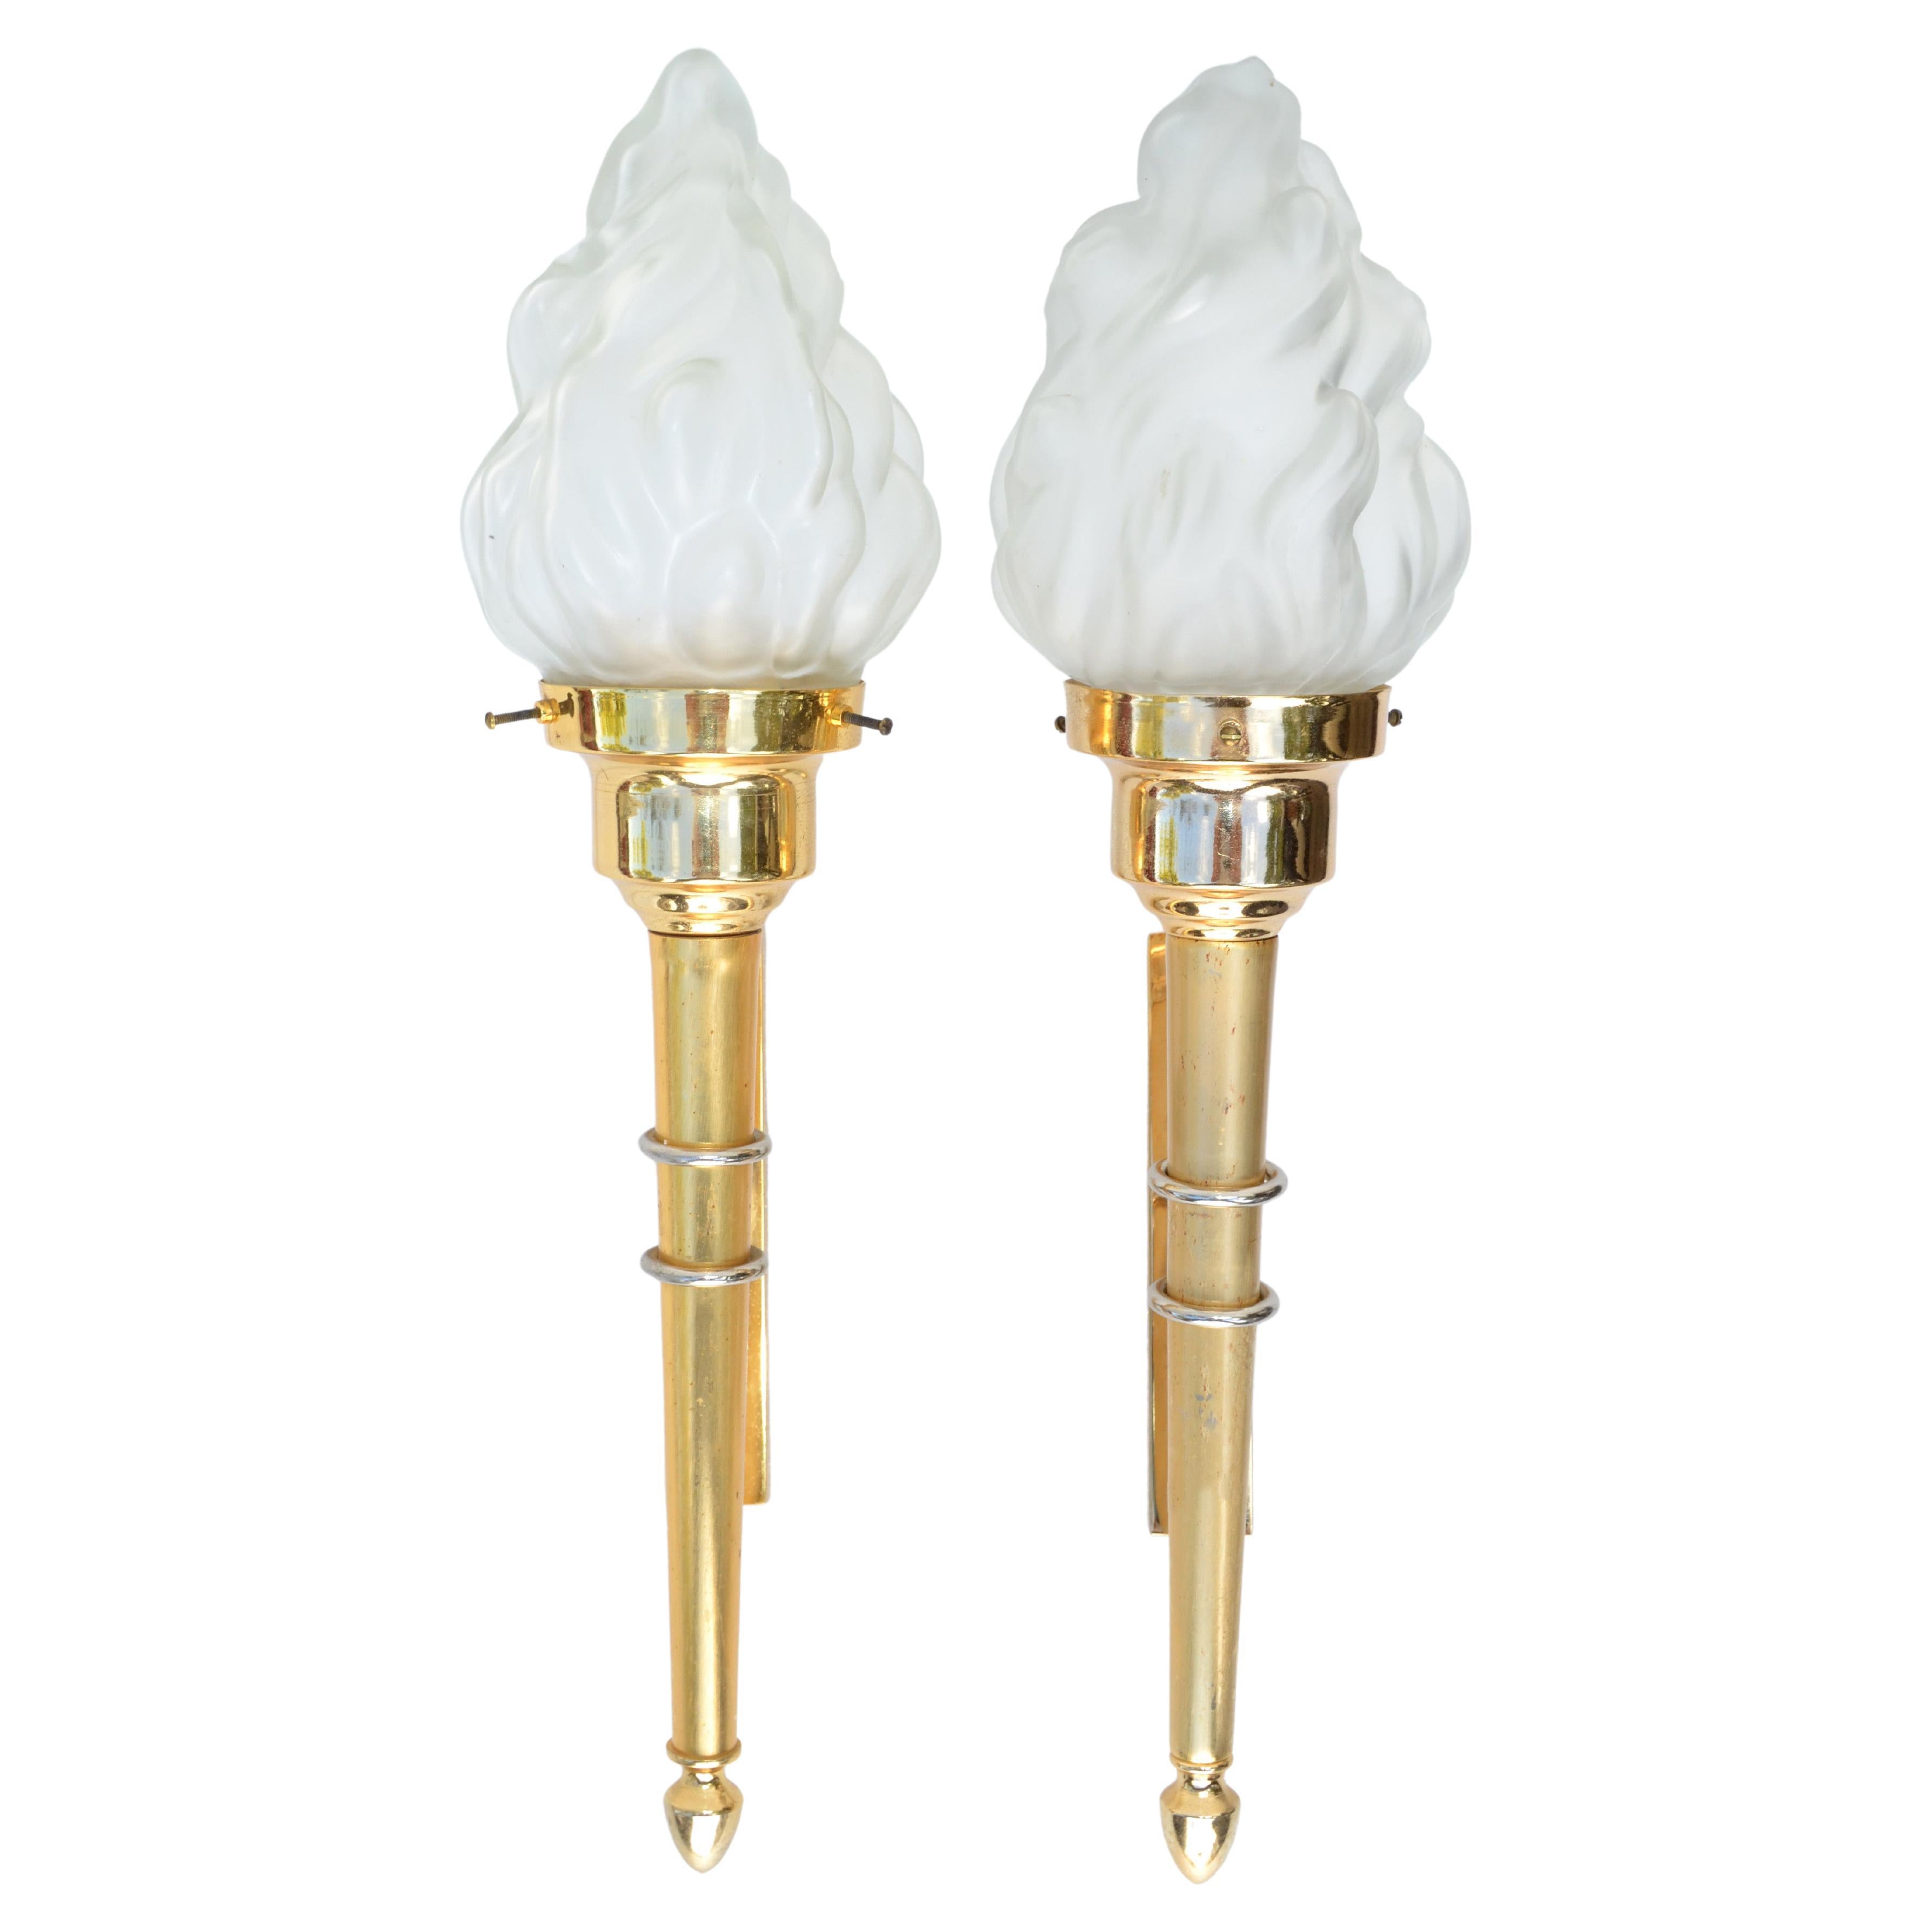 Pair of French Mid-Century Modern sconces, wall lights in brass by Maison Jansen.
Featuring a torch in gold finish with a blown glass flame shade. 
US wired and in working condition, takes one light bulb max. 60 watts.
Priced by pair, we have 2